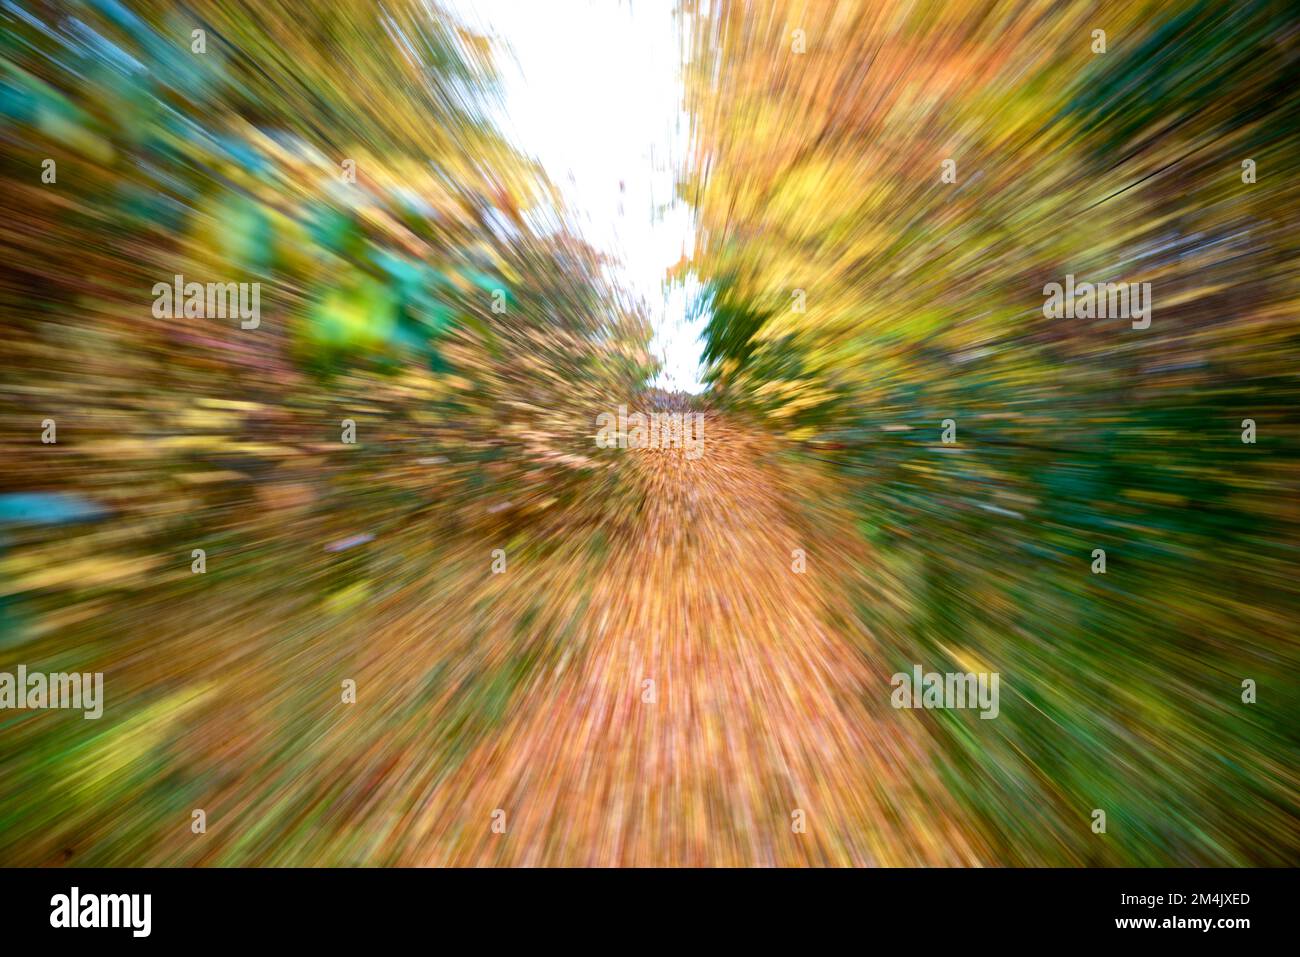 Abstract natural background concept. Conceptual image of autumn landscape background with a zoom movement effect. Stock Photo